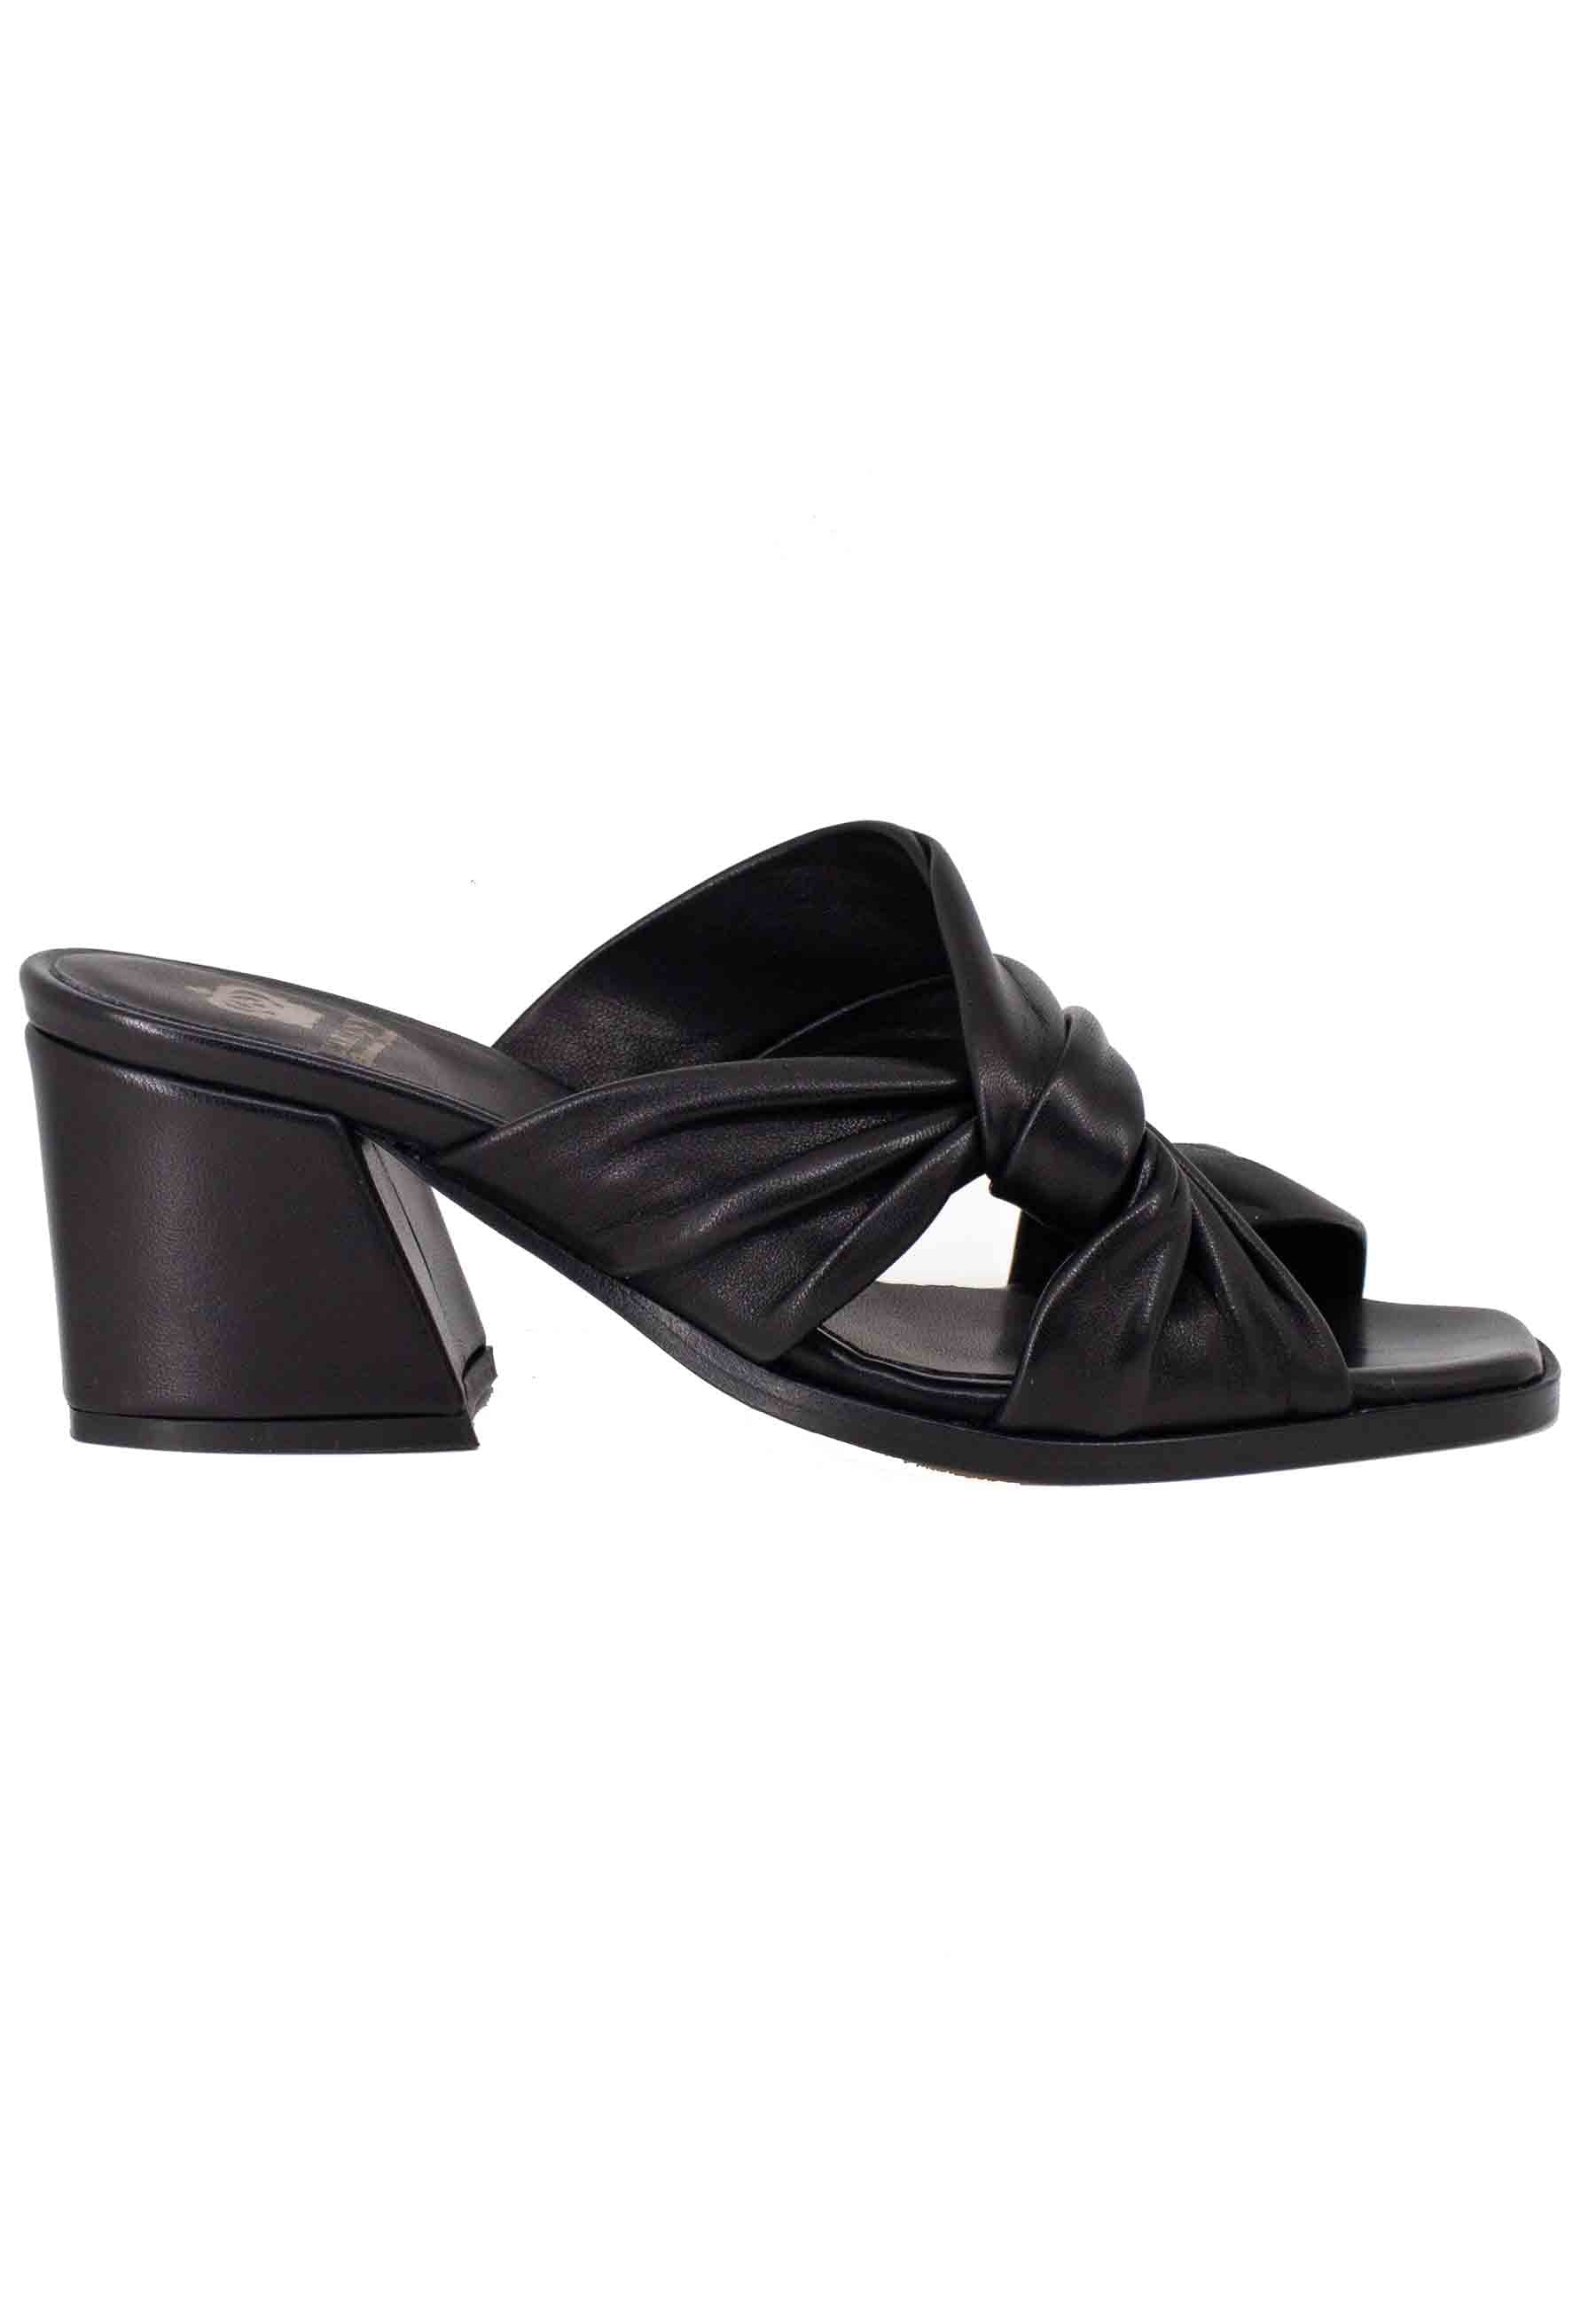 Women's black leather sandals with crossover without strap